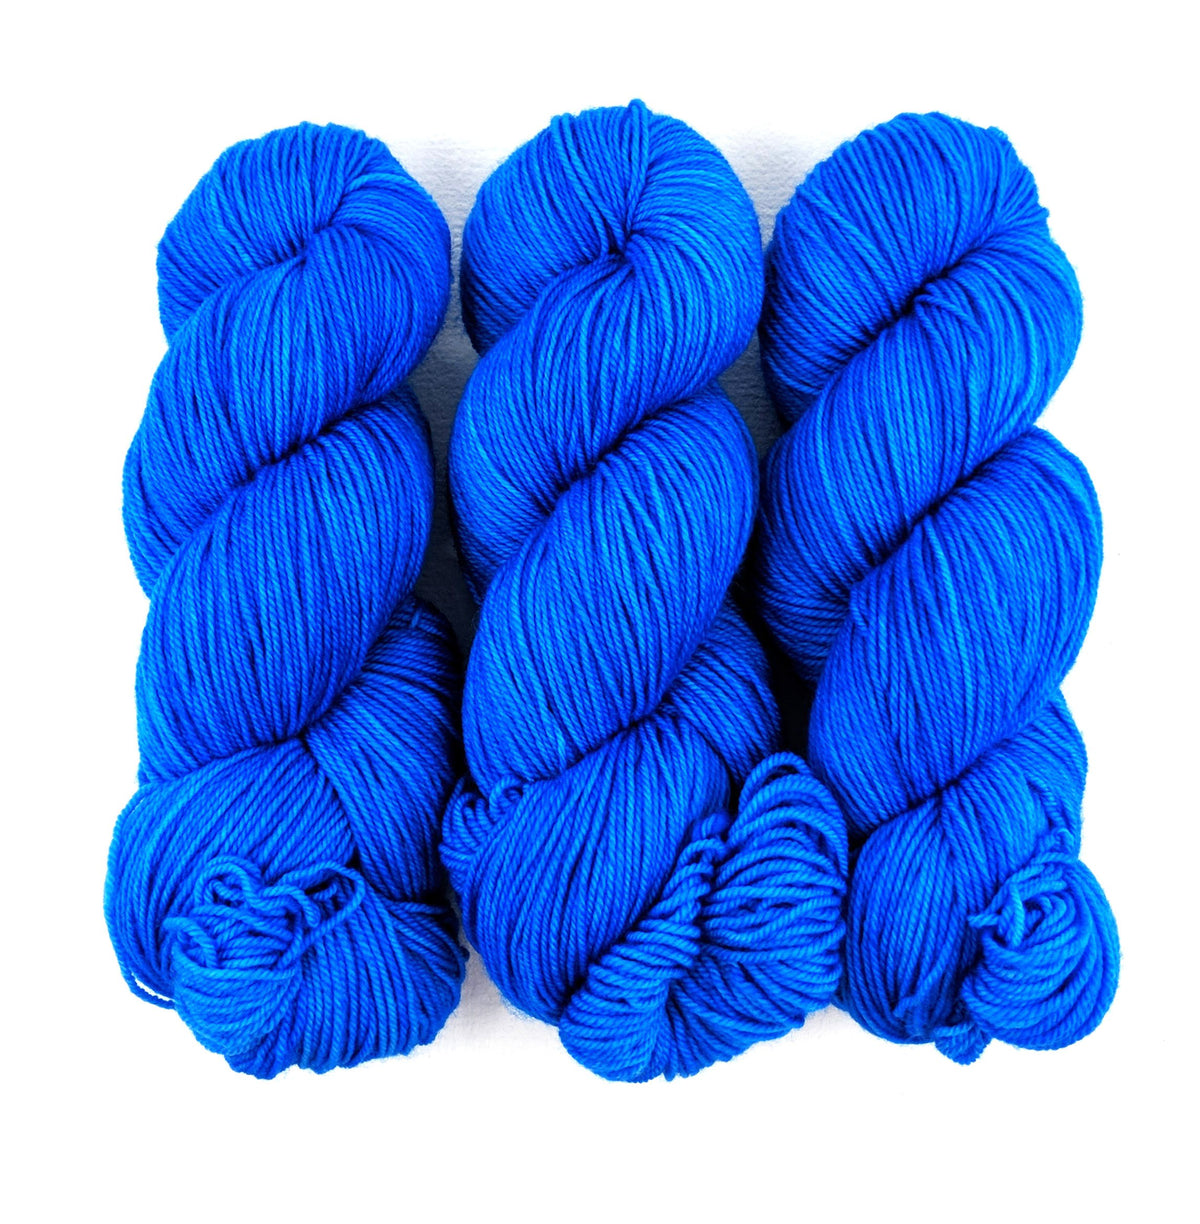 Cerulean - Revival Worsted - Dyed Stock